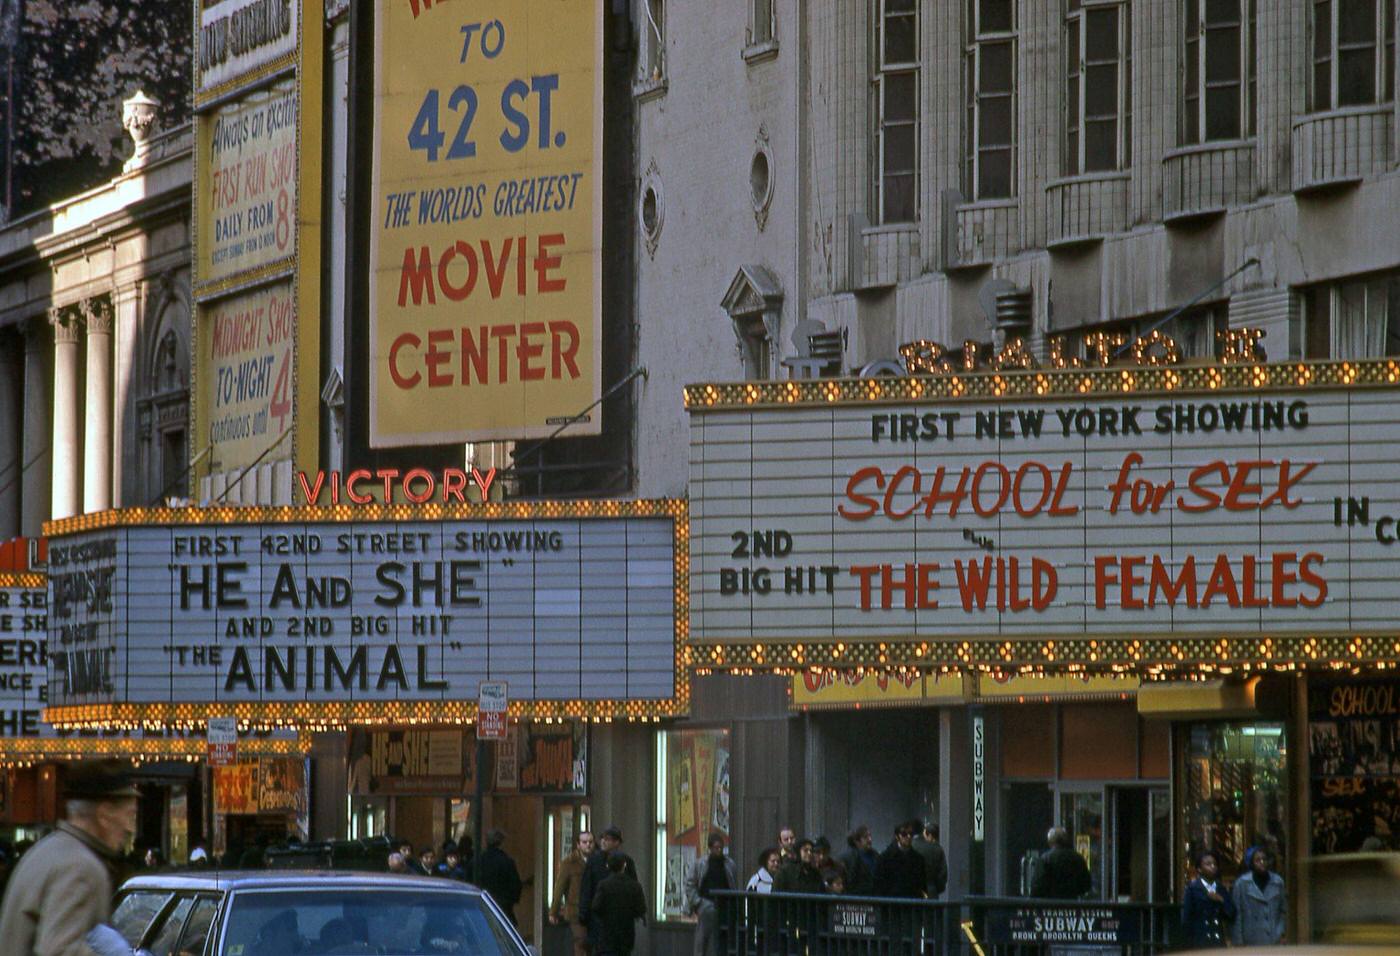 View Of Several Adult Movie Theaters Showing On 42Nd Street In The Heart Of Times Square, Manhattan, 1971.